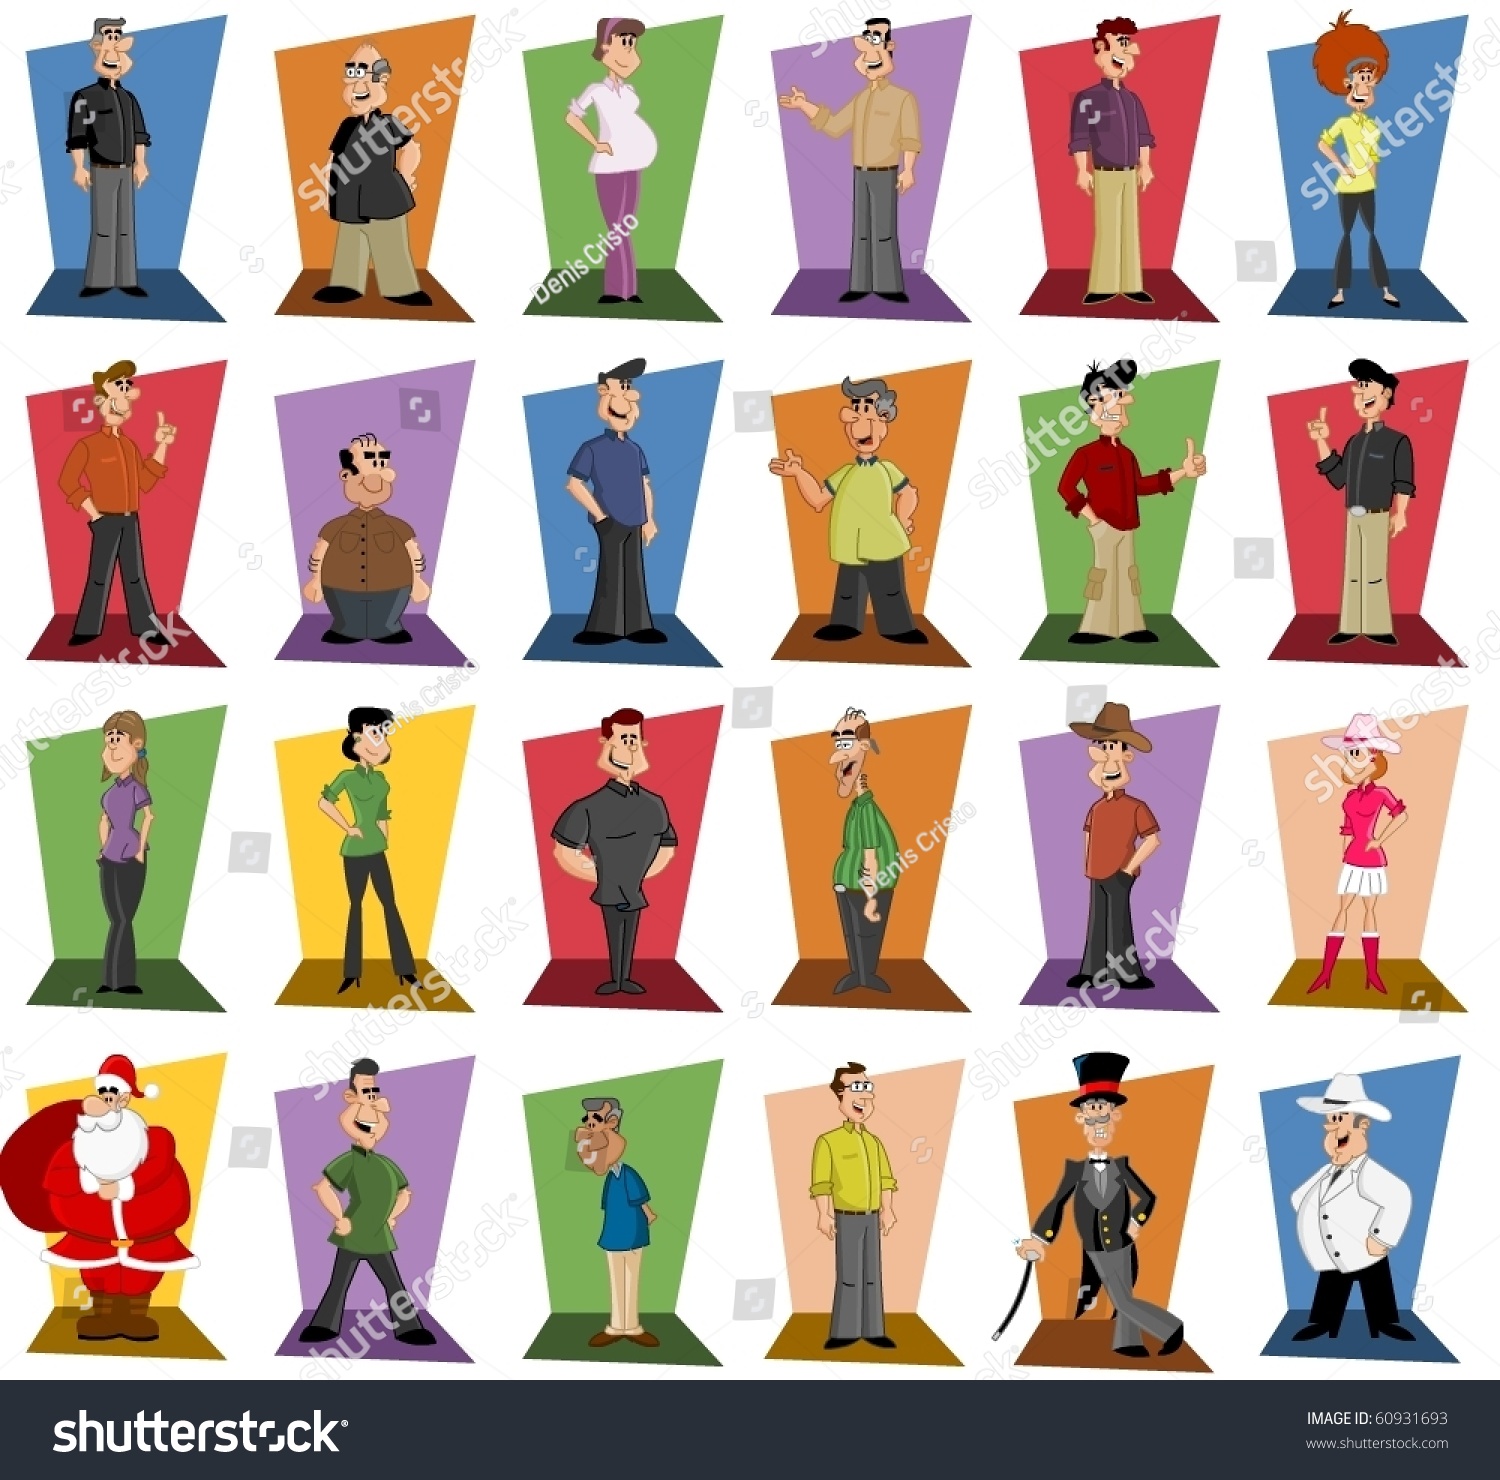 Group People Wearing Colorful Clothes Stock Vector 60931693 Shutterstock